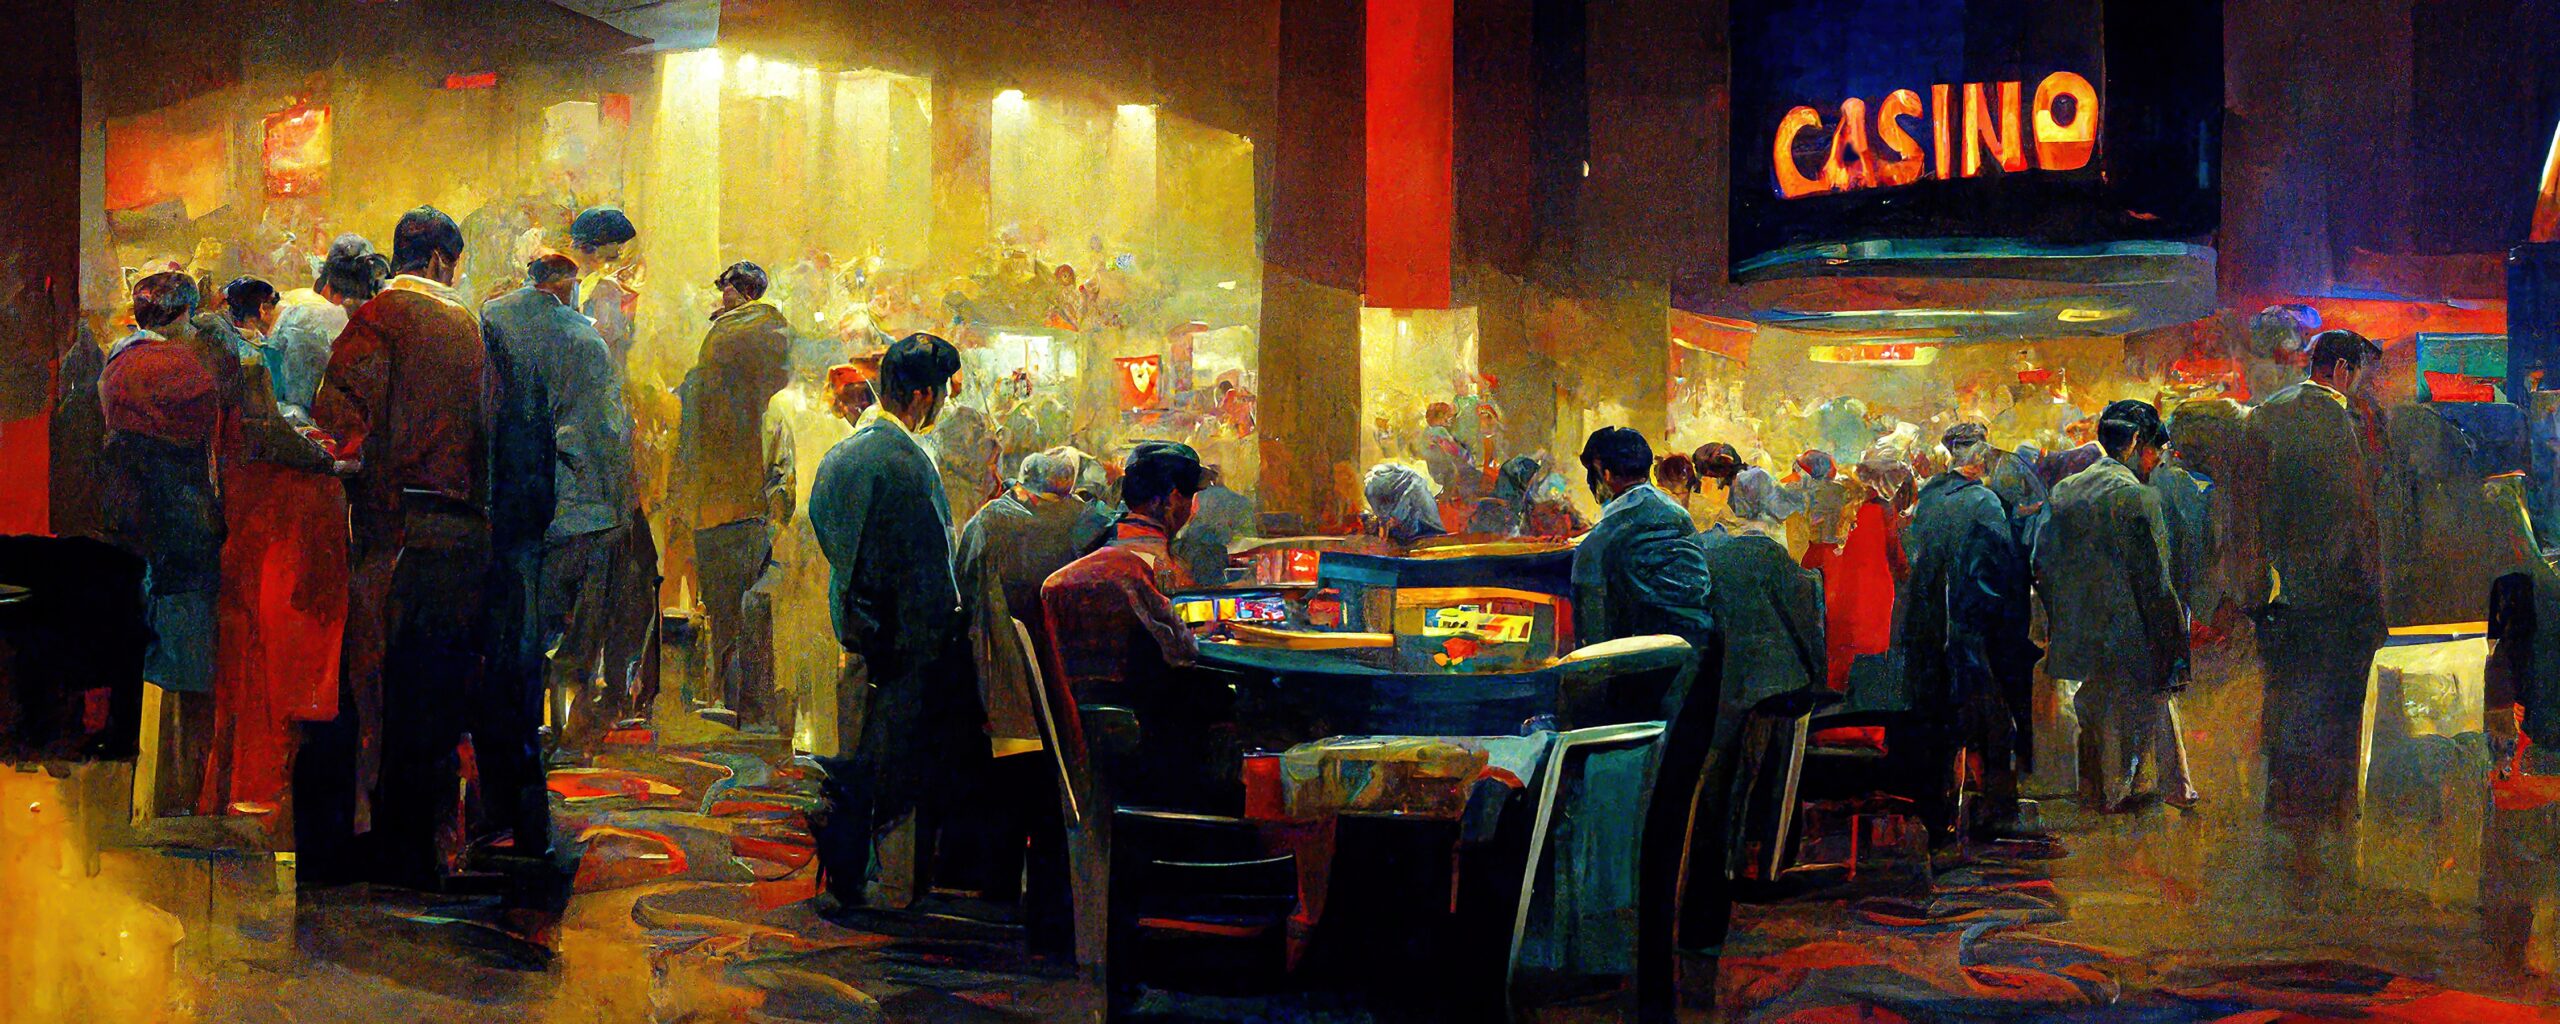 The Stuff About Casino You Probably Hadn't Considered. And Really Should